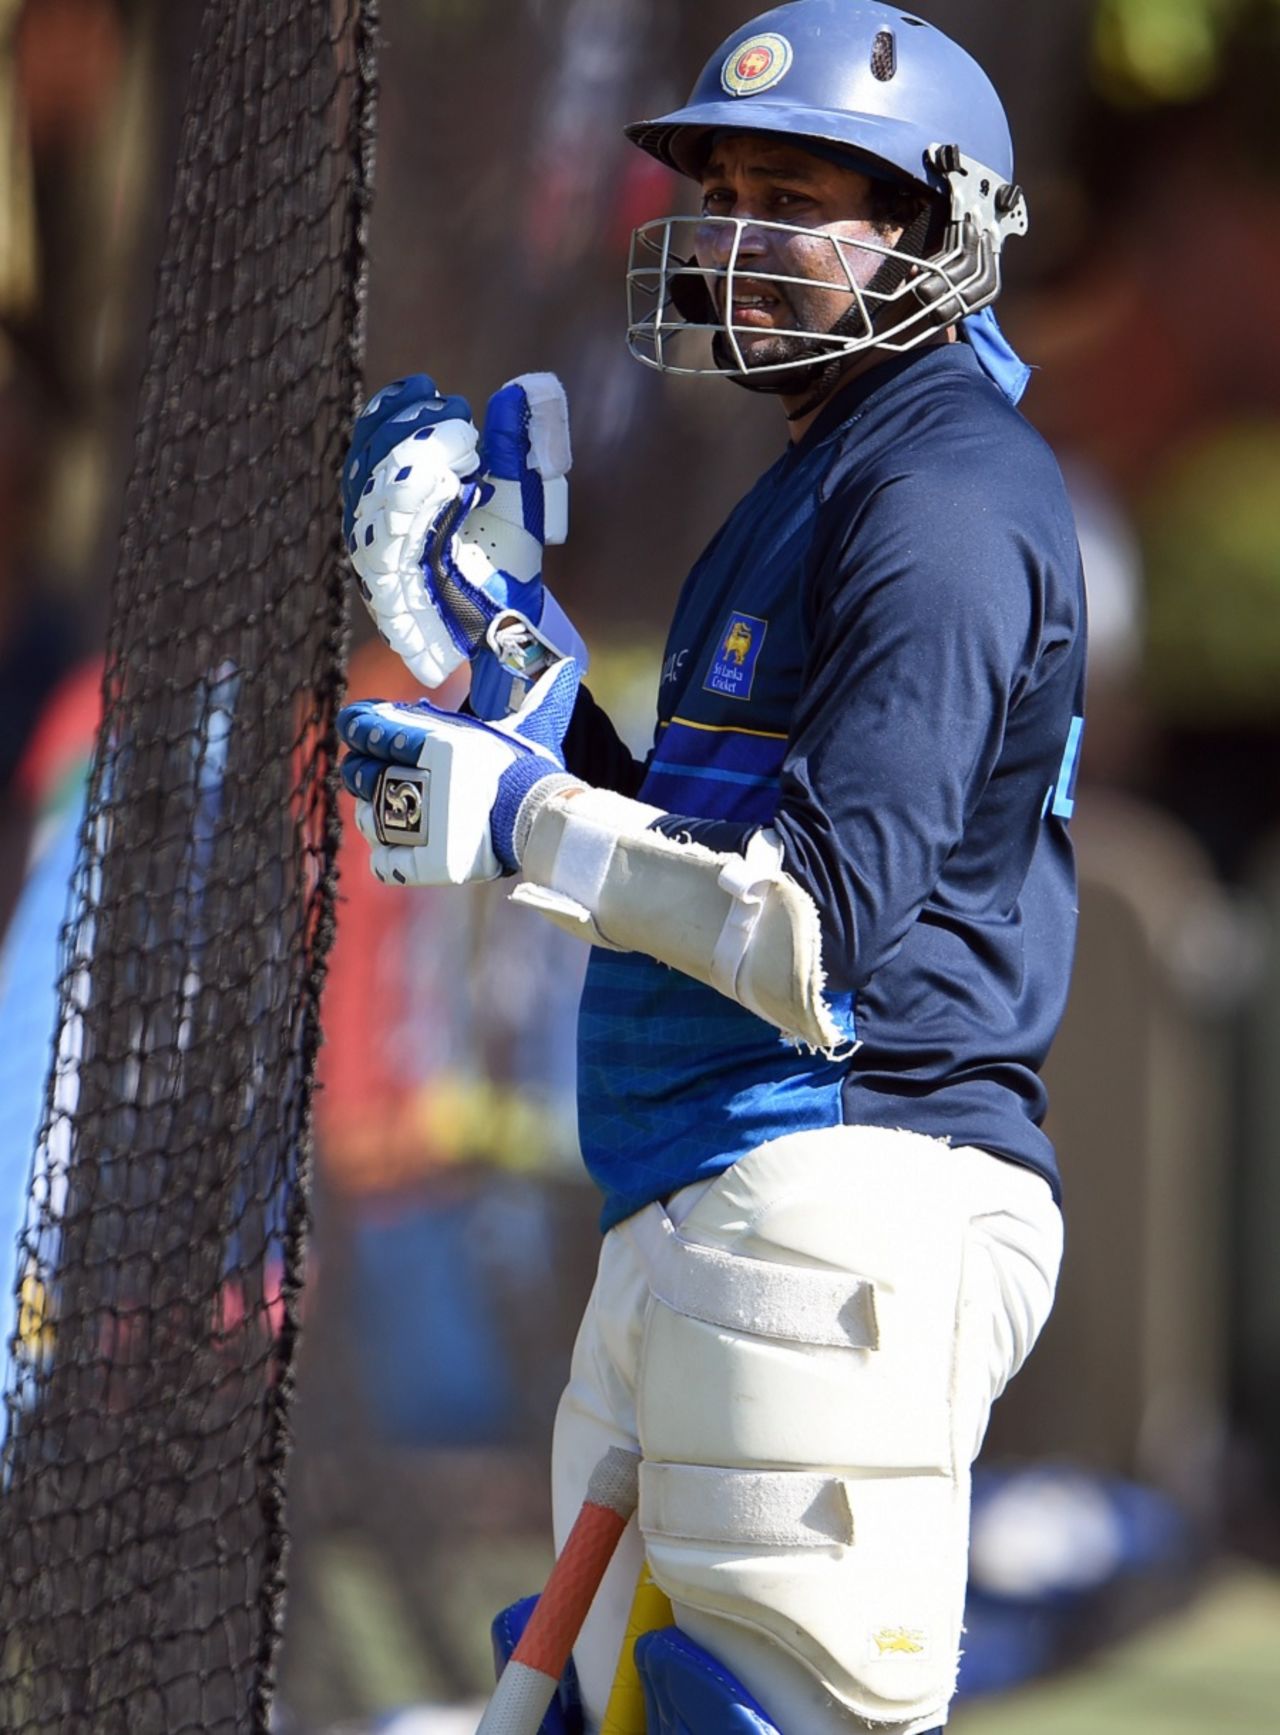 Tillakaratne Dilshan awaits his turn to bat in practice, World Cup 2015, Sydney, March 7, 2015